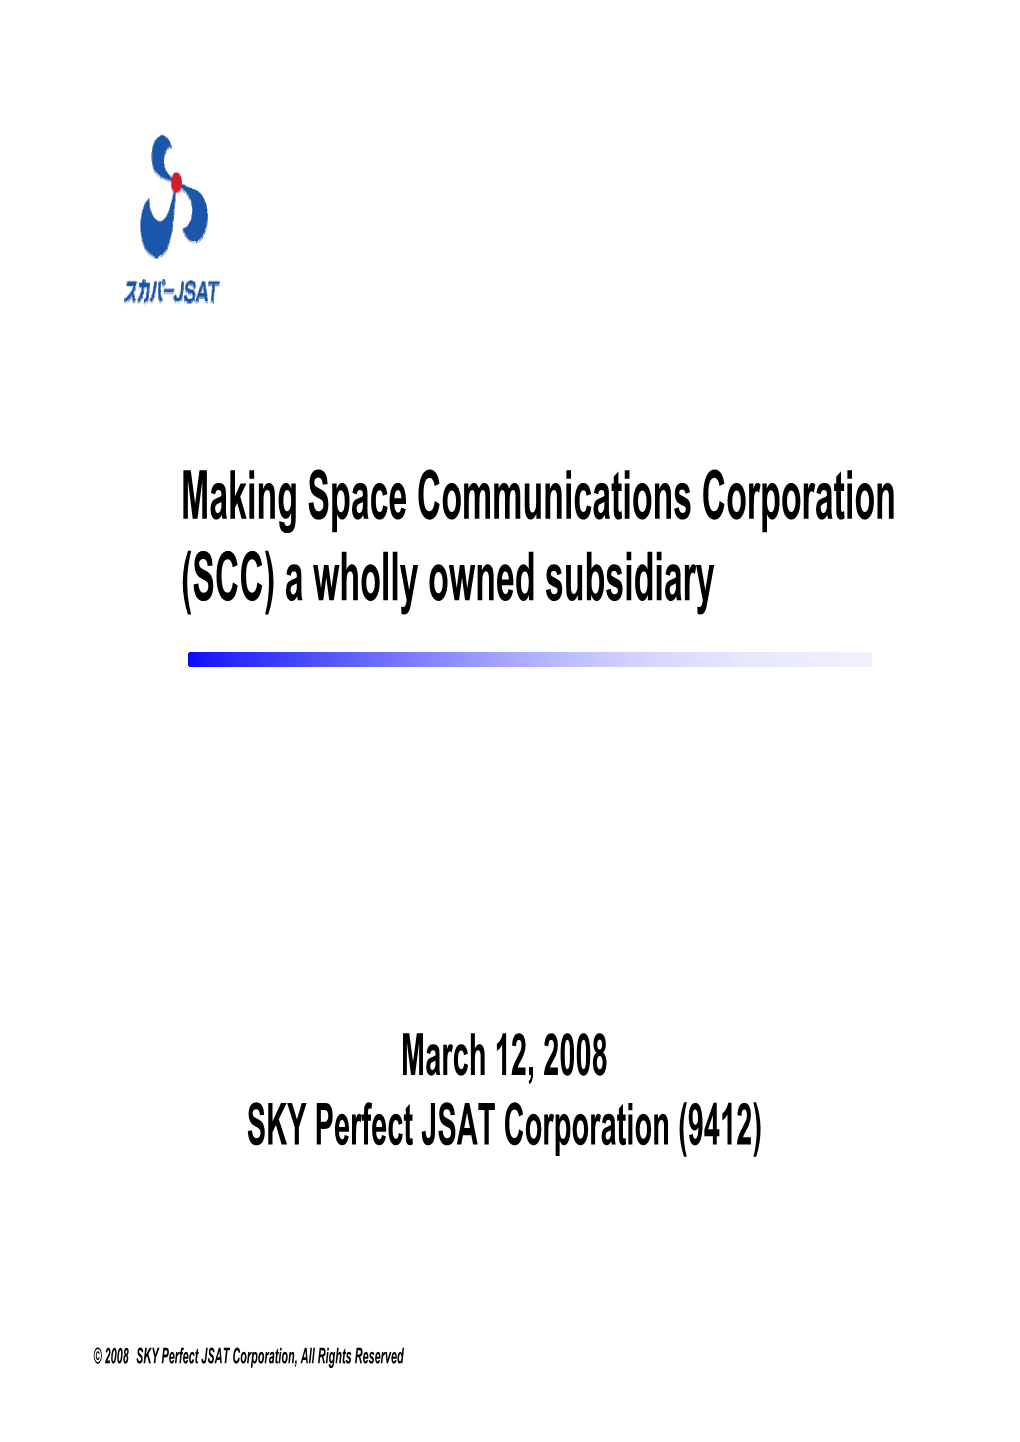 Making Space Communications Corporation (SCC) a Wholly Owned Subsidiary